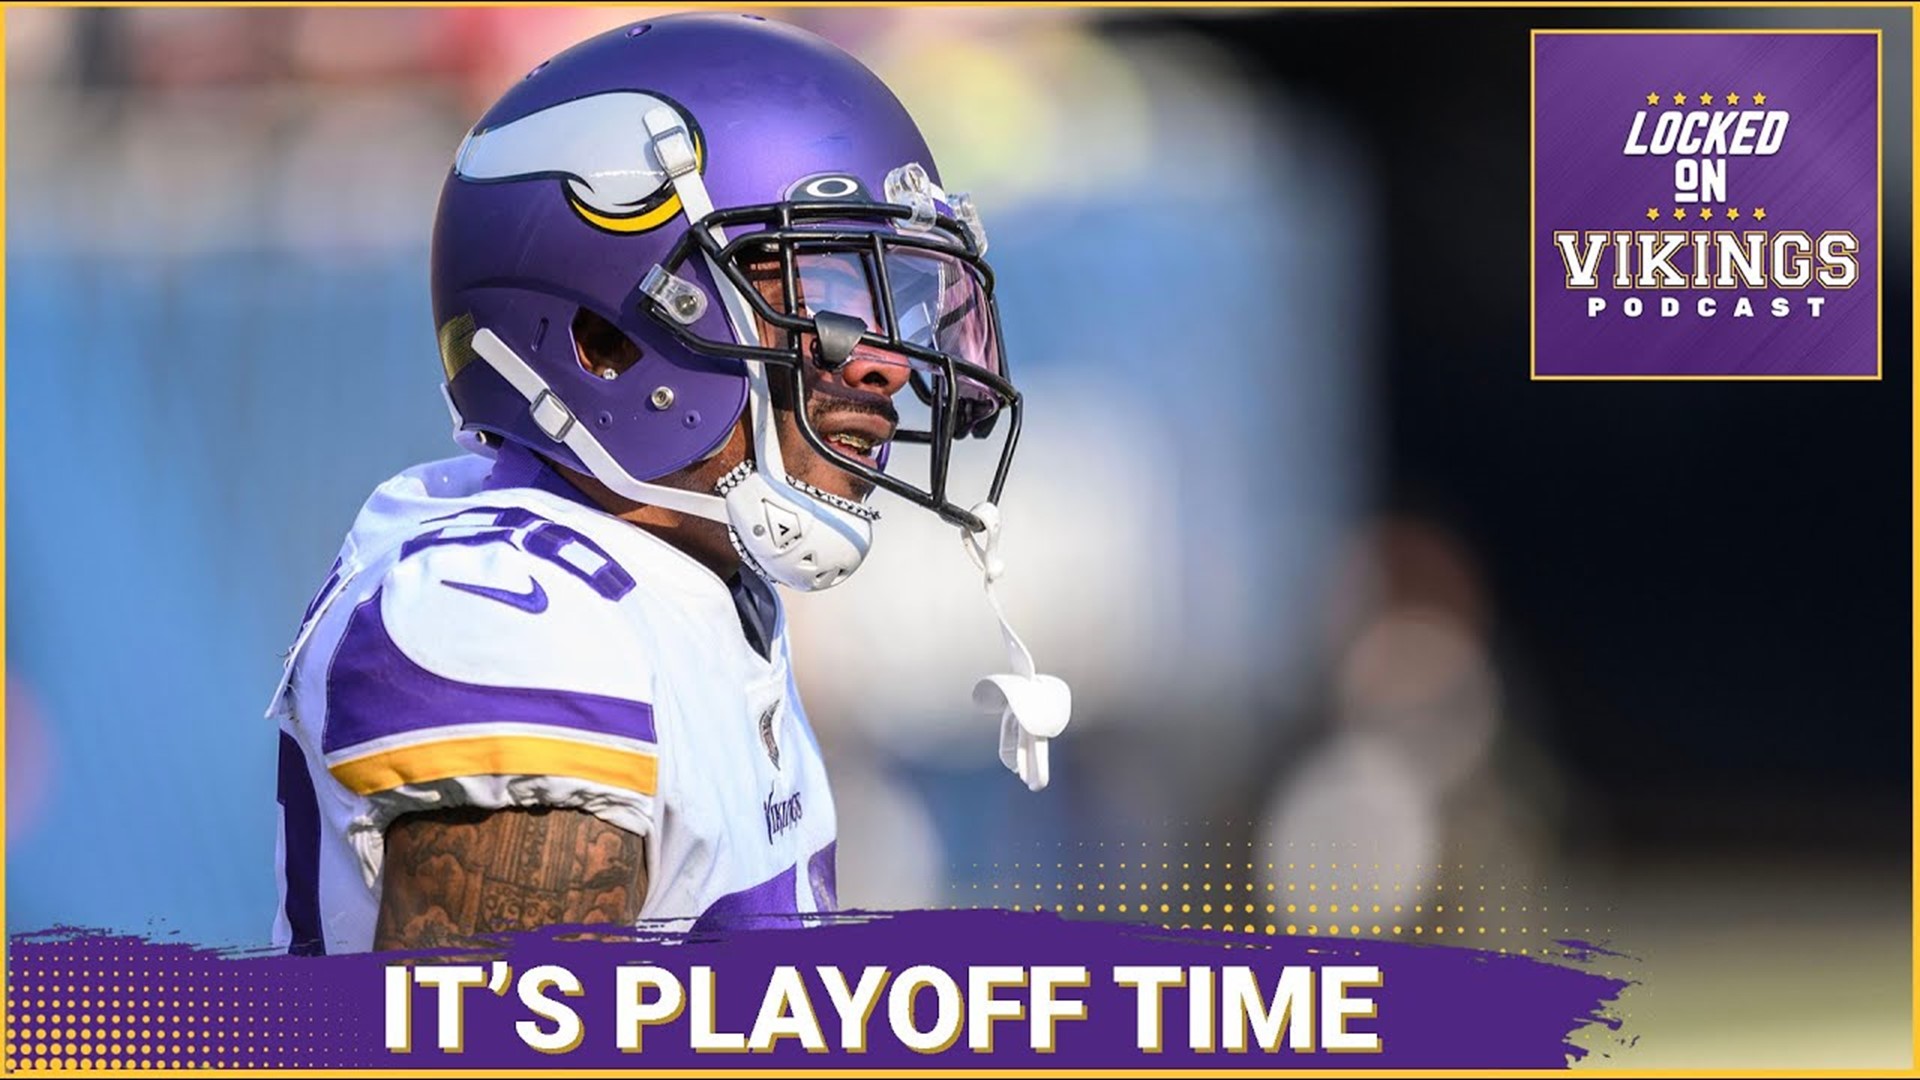 The Vikings starters exited the game at halftime, but we still have plenty of interesting things to analyze, and more importantly, whine about.